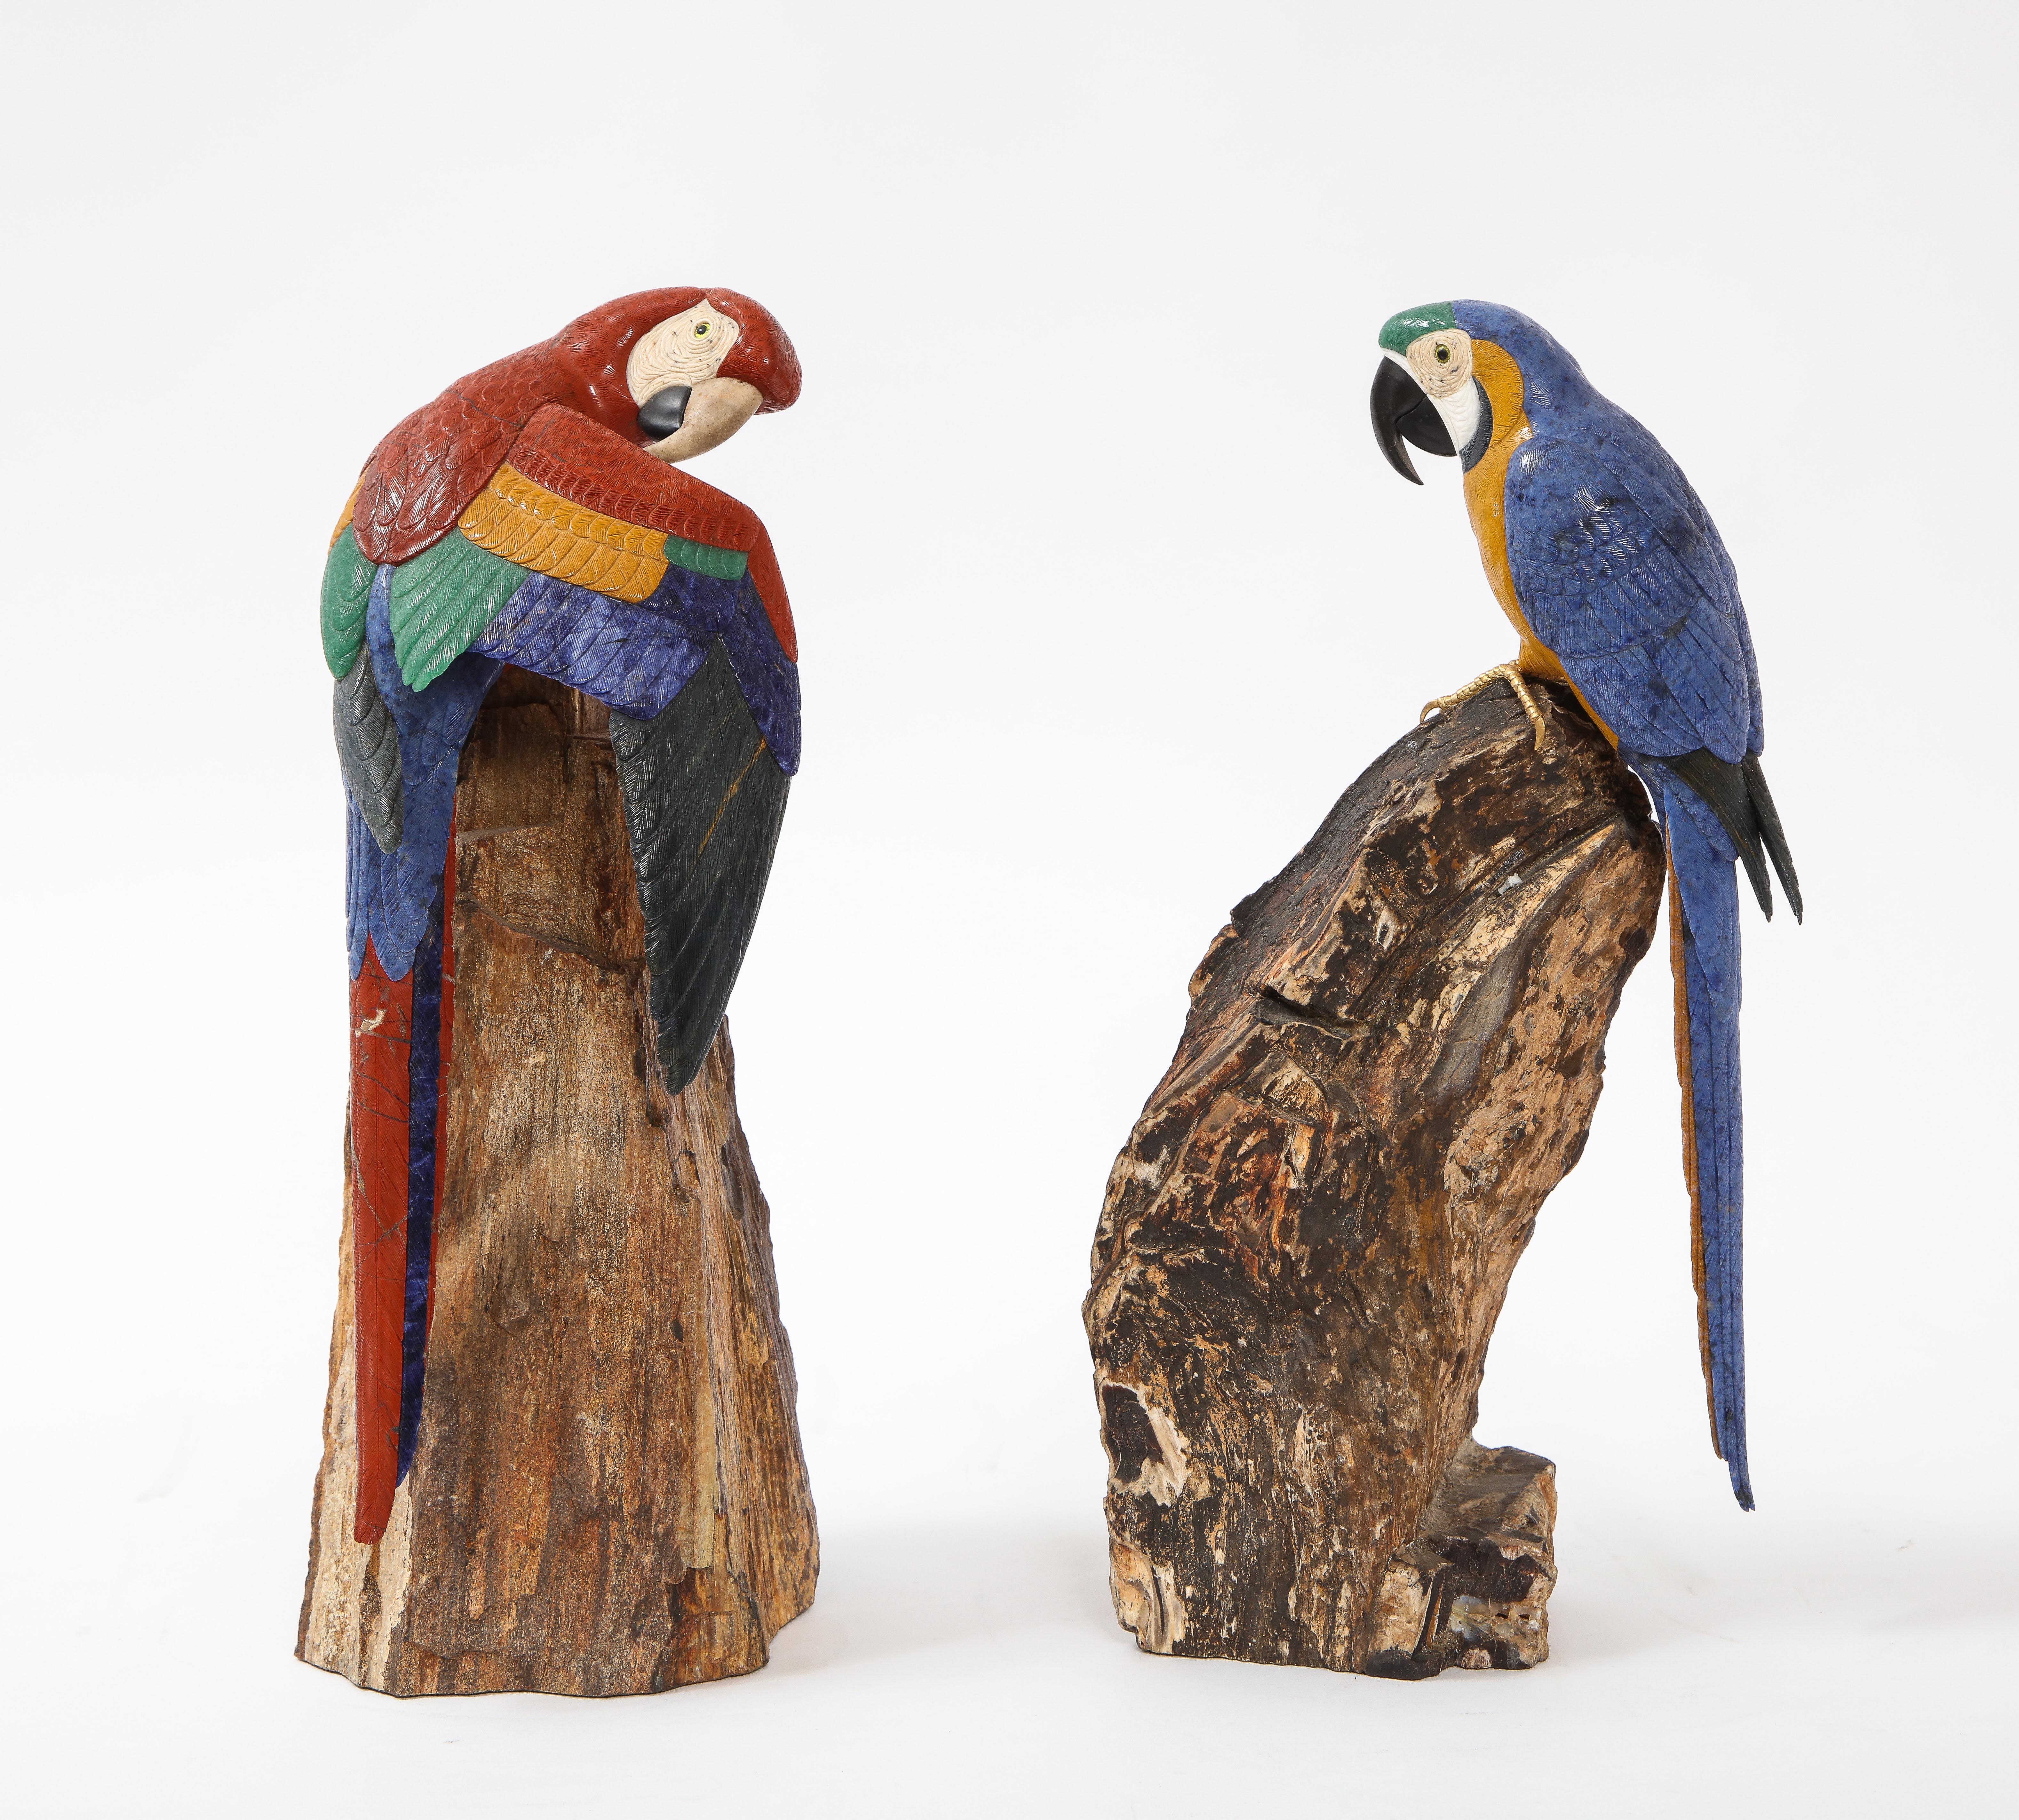 A fantastic pair of multi-semi precious stone and gold mounted Models of Scarlet Macaw Parrots, Attributed to Peter Müller, Swiss. This regal pair of Scarlet Macaws are each perched in royal splendor upon a pair of exceptional specimens of petrified